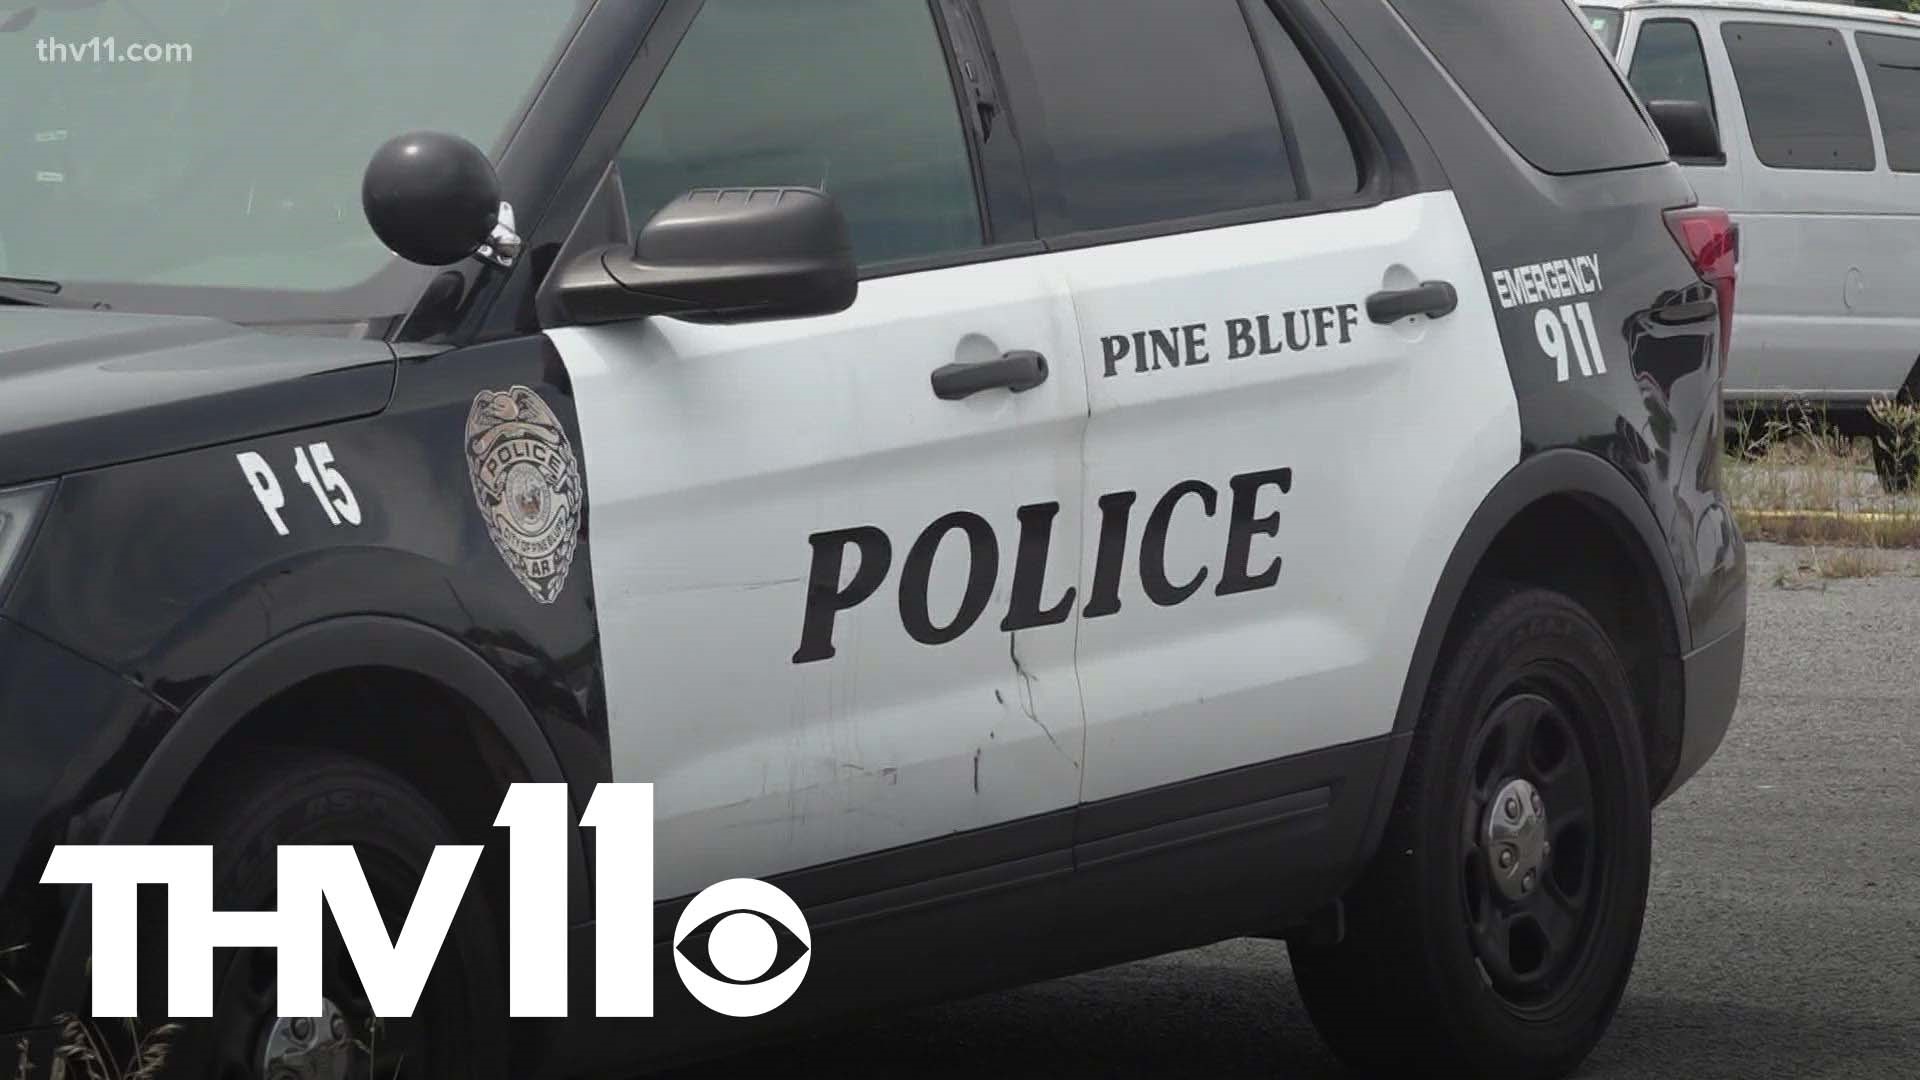 The Pine Bluff Police Department is investigating a Monday night shooting that left one person dead and another injured.